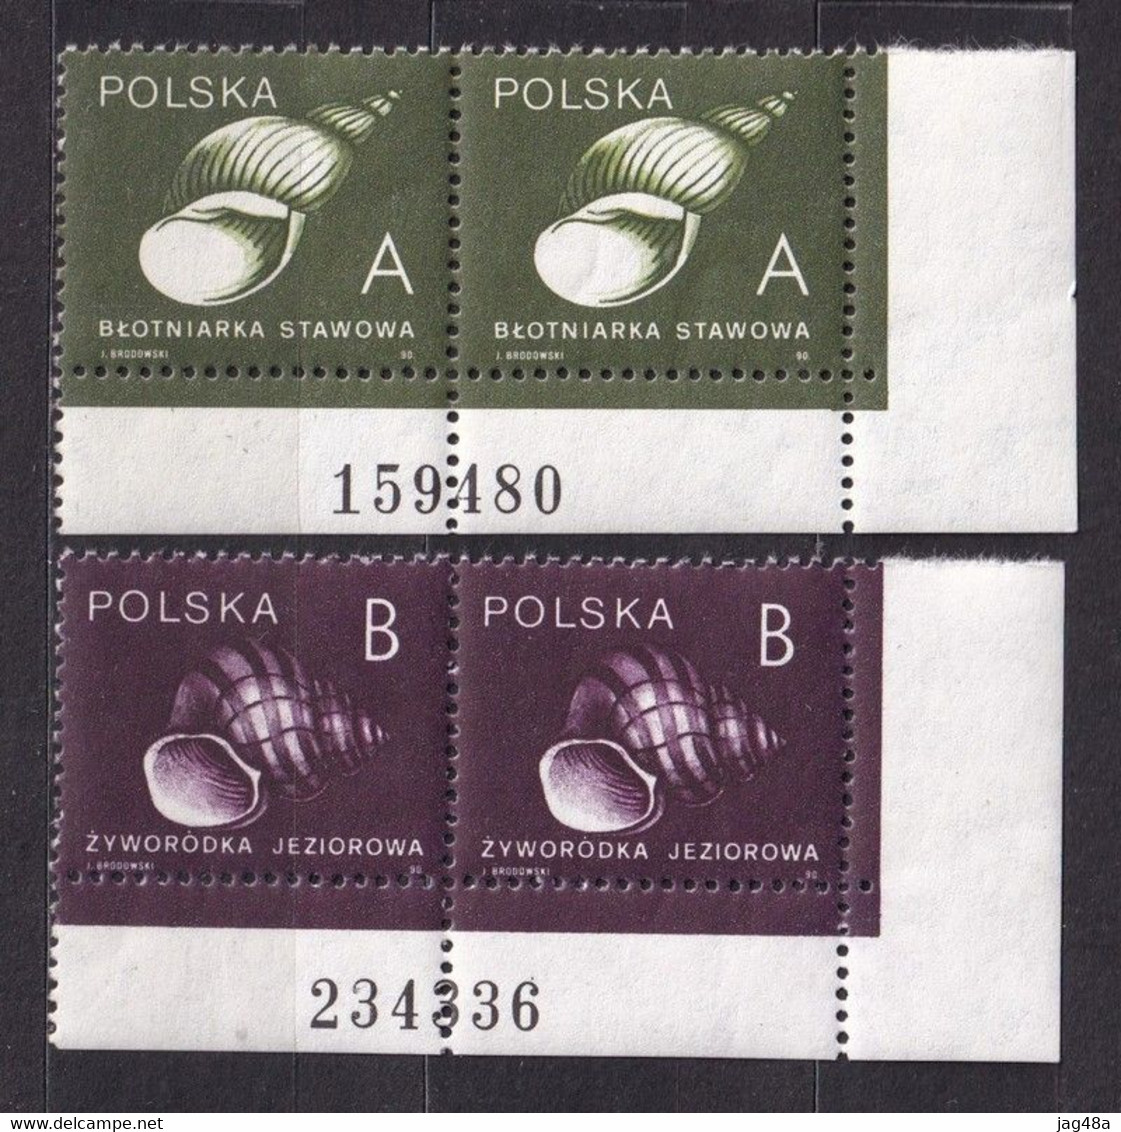 POLAND. 1990/Shells.. 2v In Pair With Numbered Margin/mintNH. - Proofs & Reprints